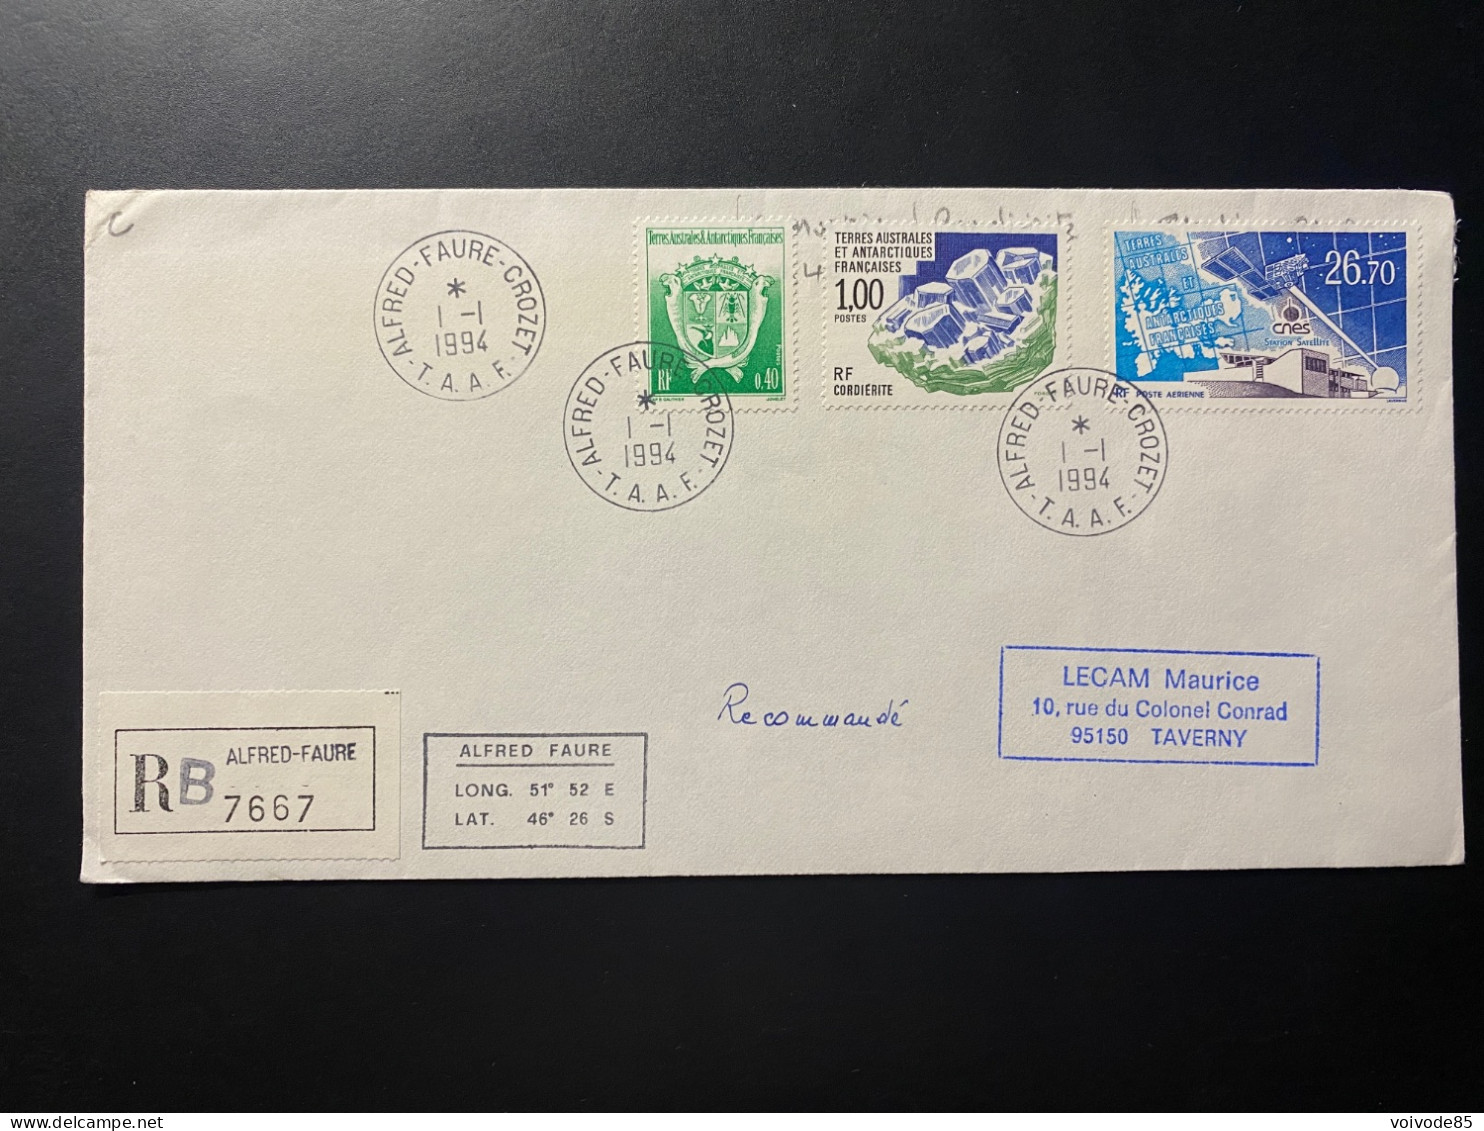 Lettre "TAAF" - 01/01/1994 - 184 - 185 - PA131 - TAAF - Crozet - Station Satellite Du CNES - Covers & Documents